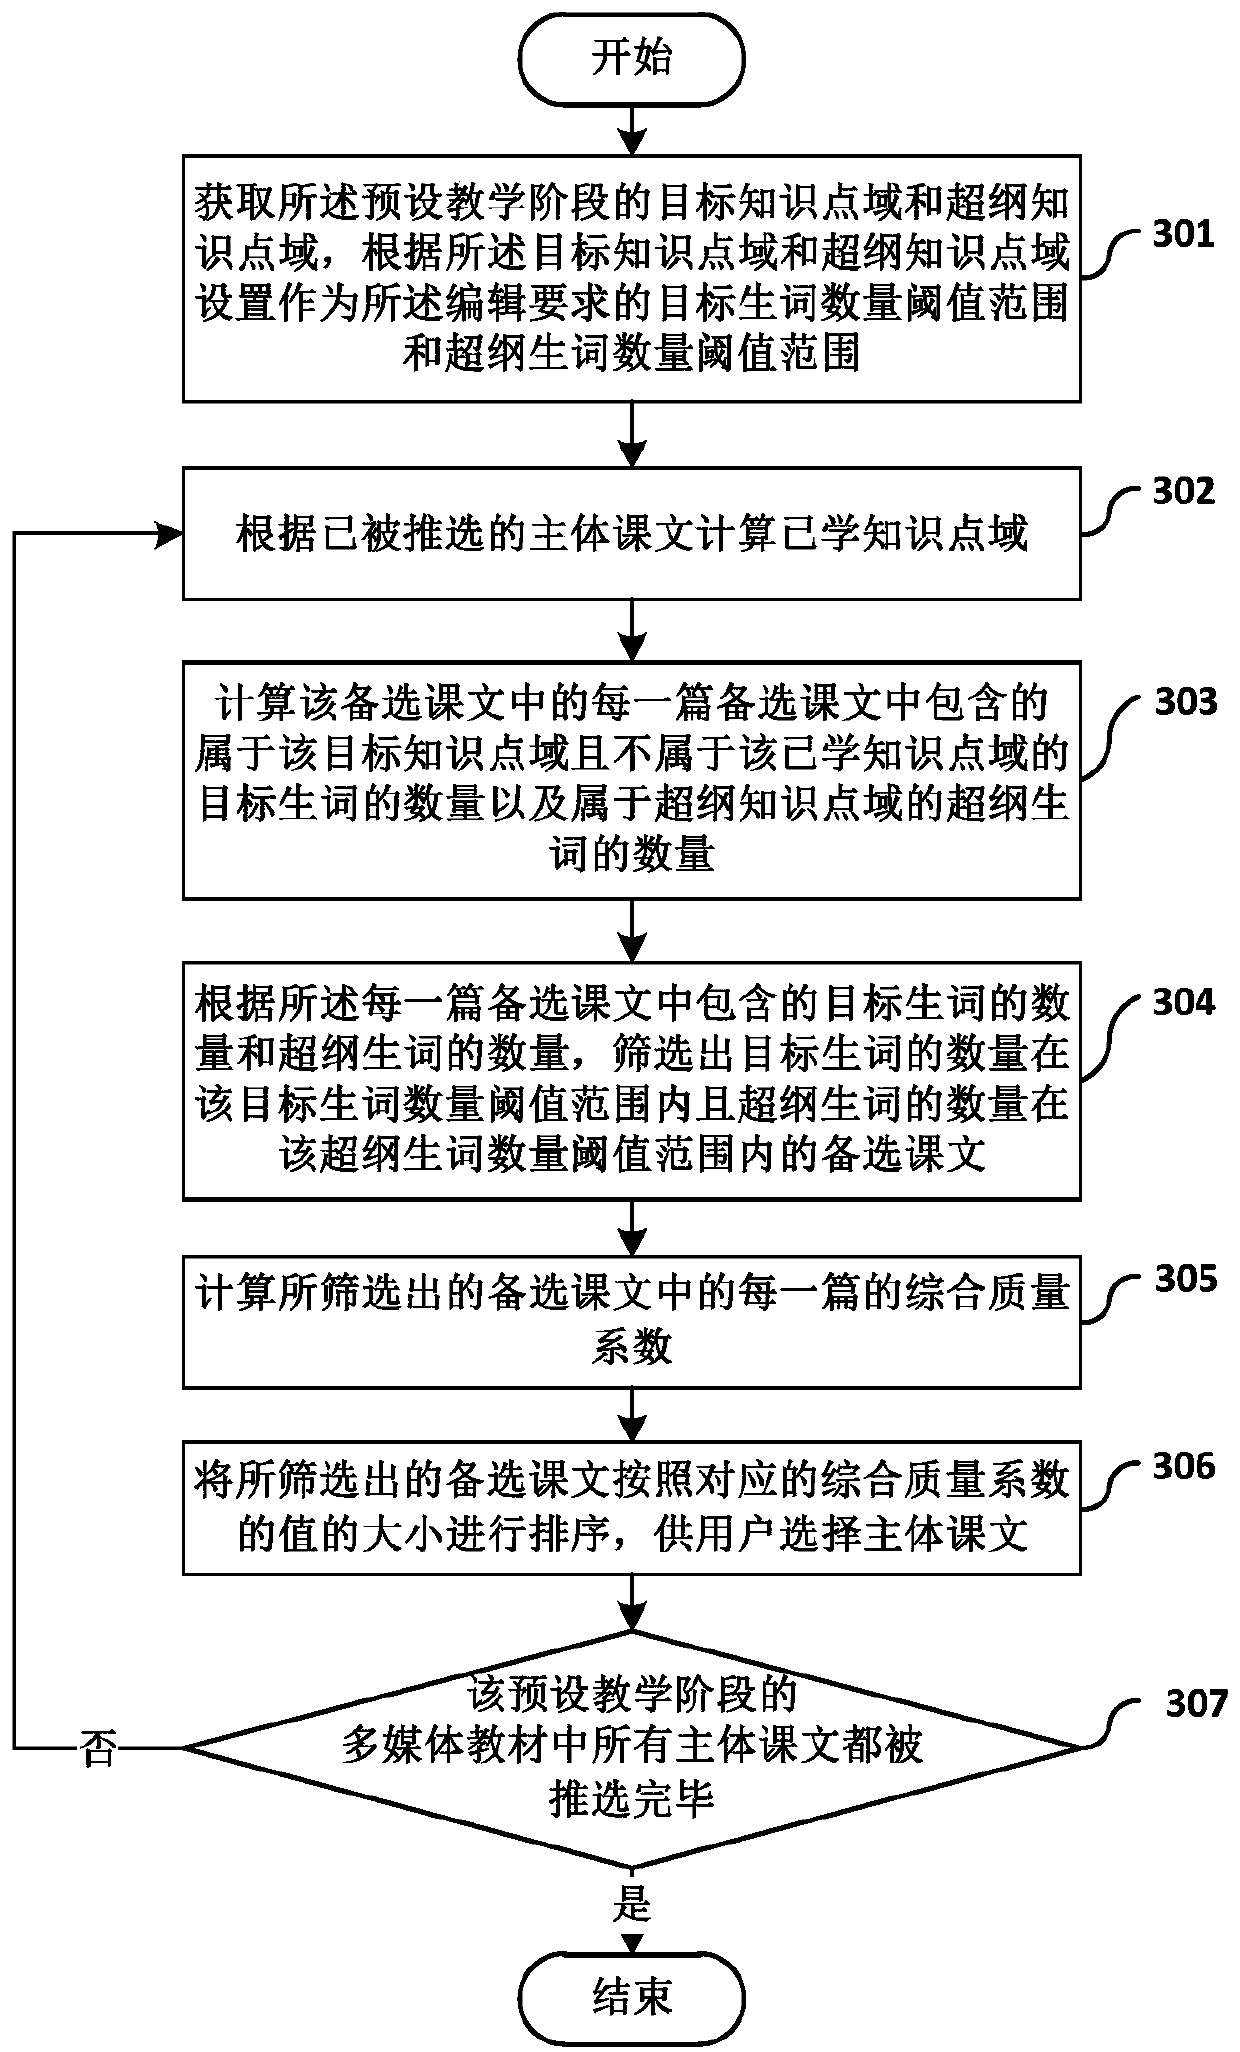 Multimedia teaching material editing method and system based on artificial intelligence